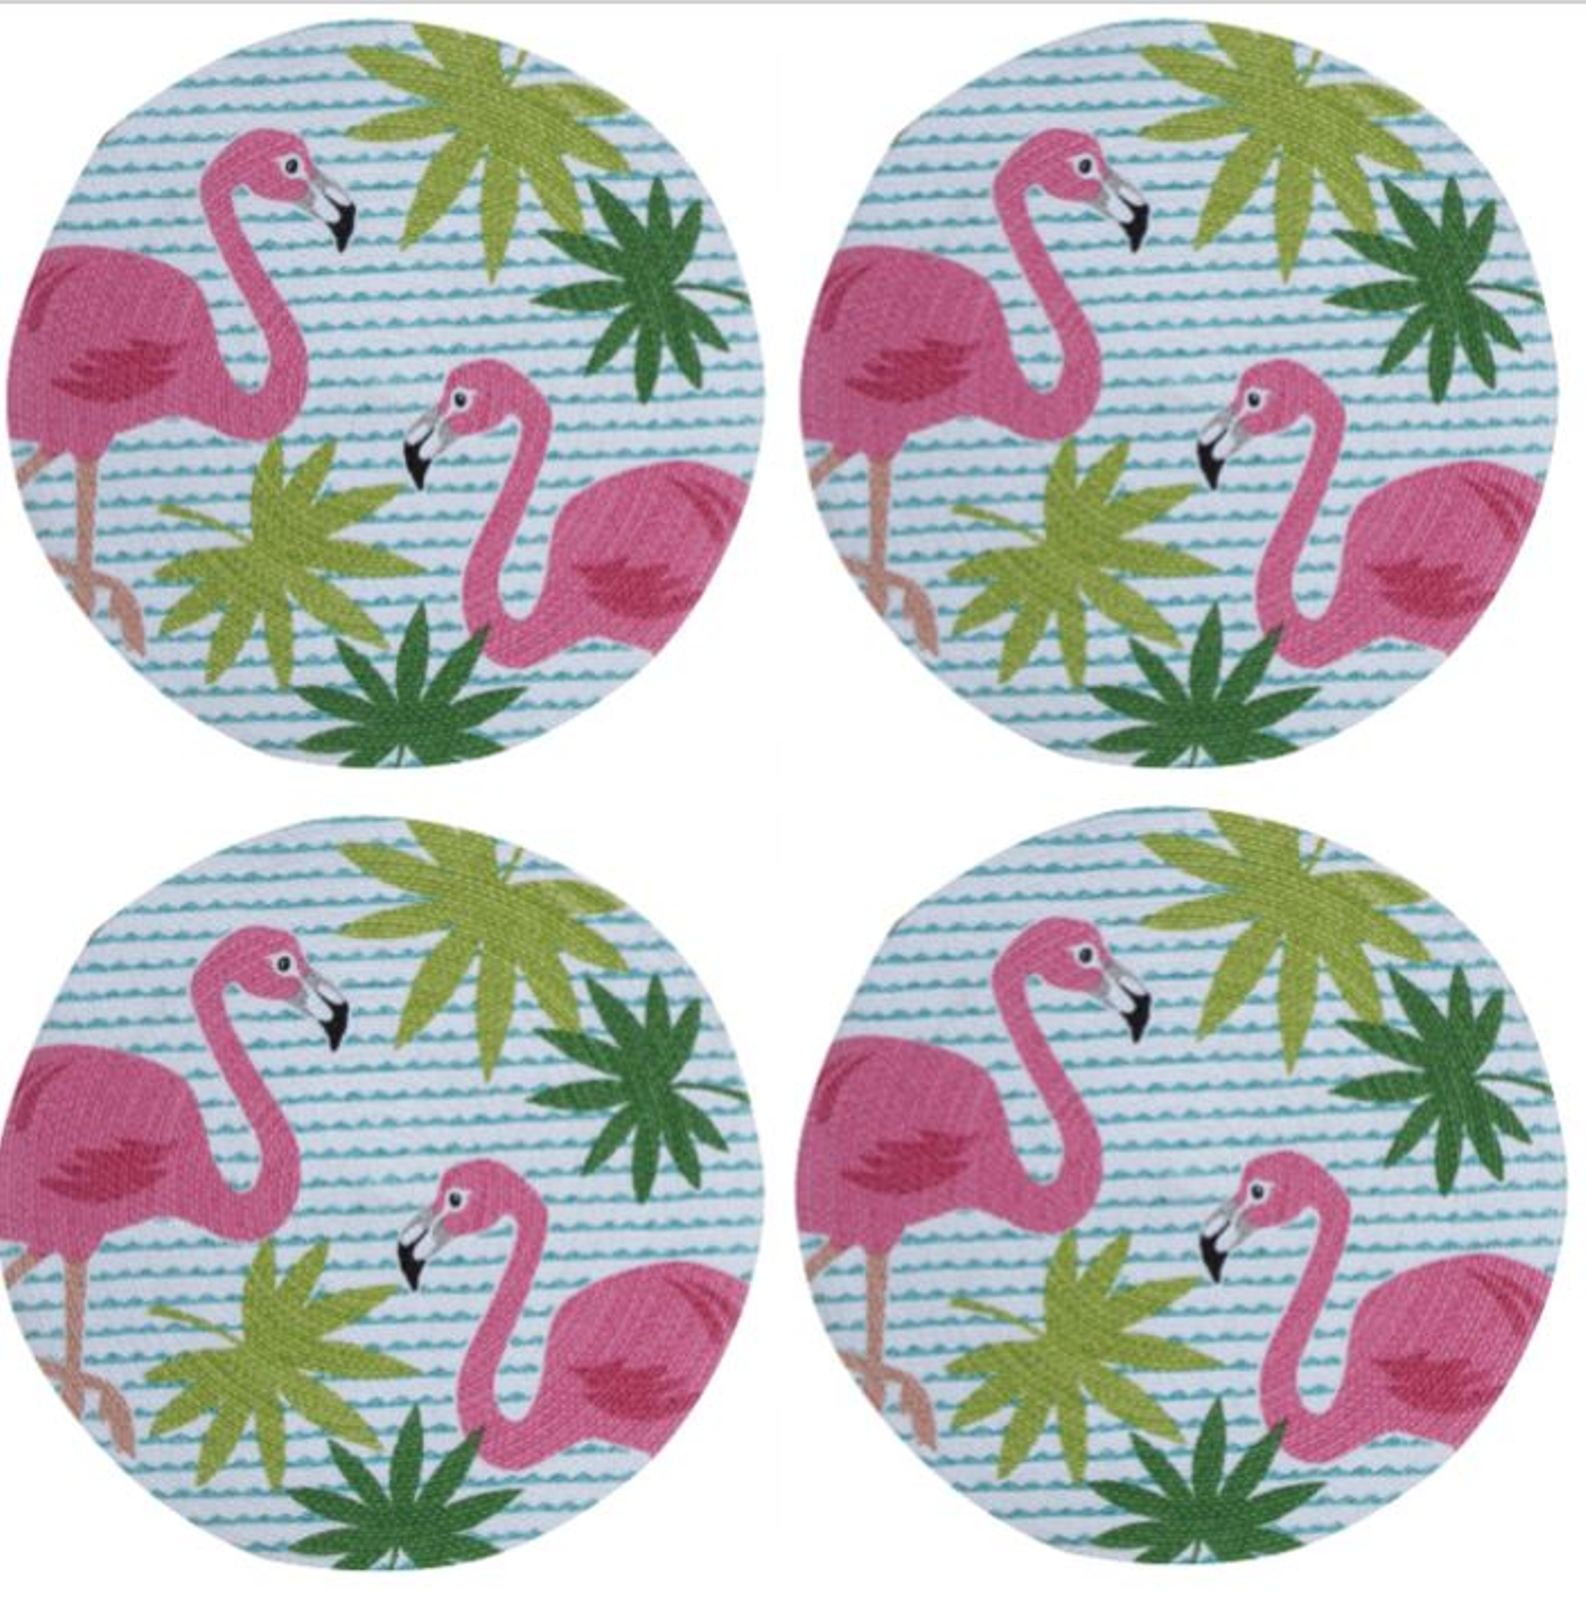 Square Dining Table Place Mats Set of 4 MNSRUU Pink American Or Caribbean Flamingo Exotic Birds Set Abstract Background Vector Illustration Placemats Easy to Clean Durable Non-Slip Kitchen Table Ma